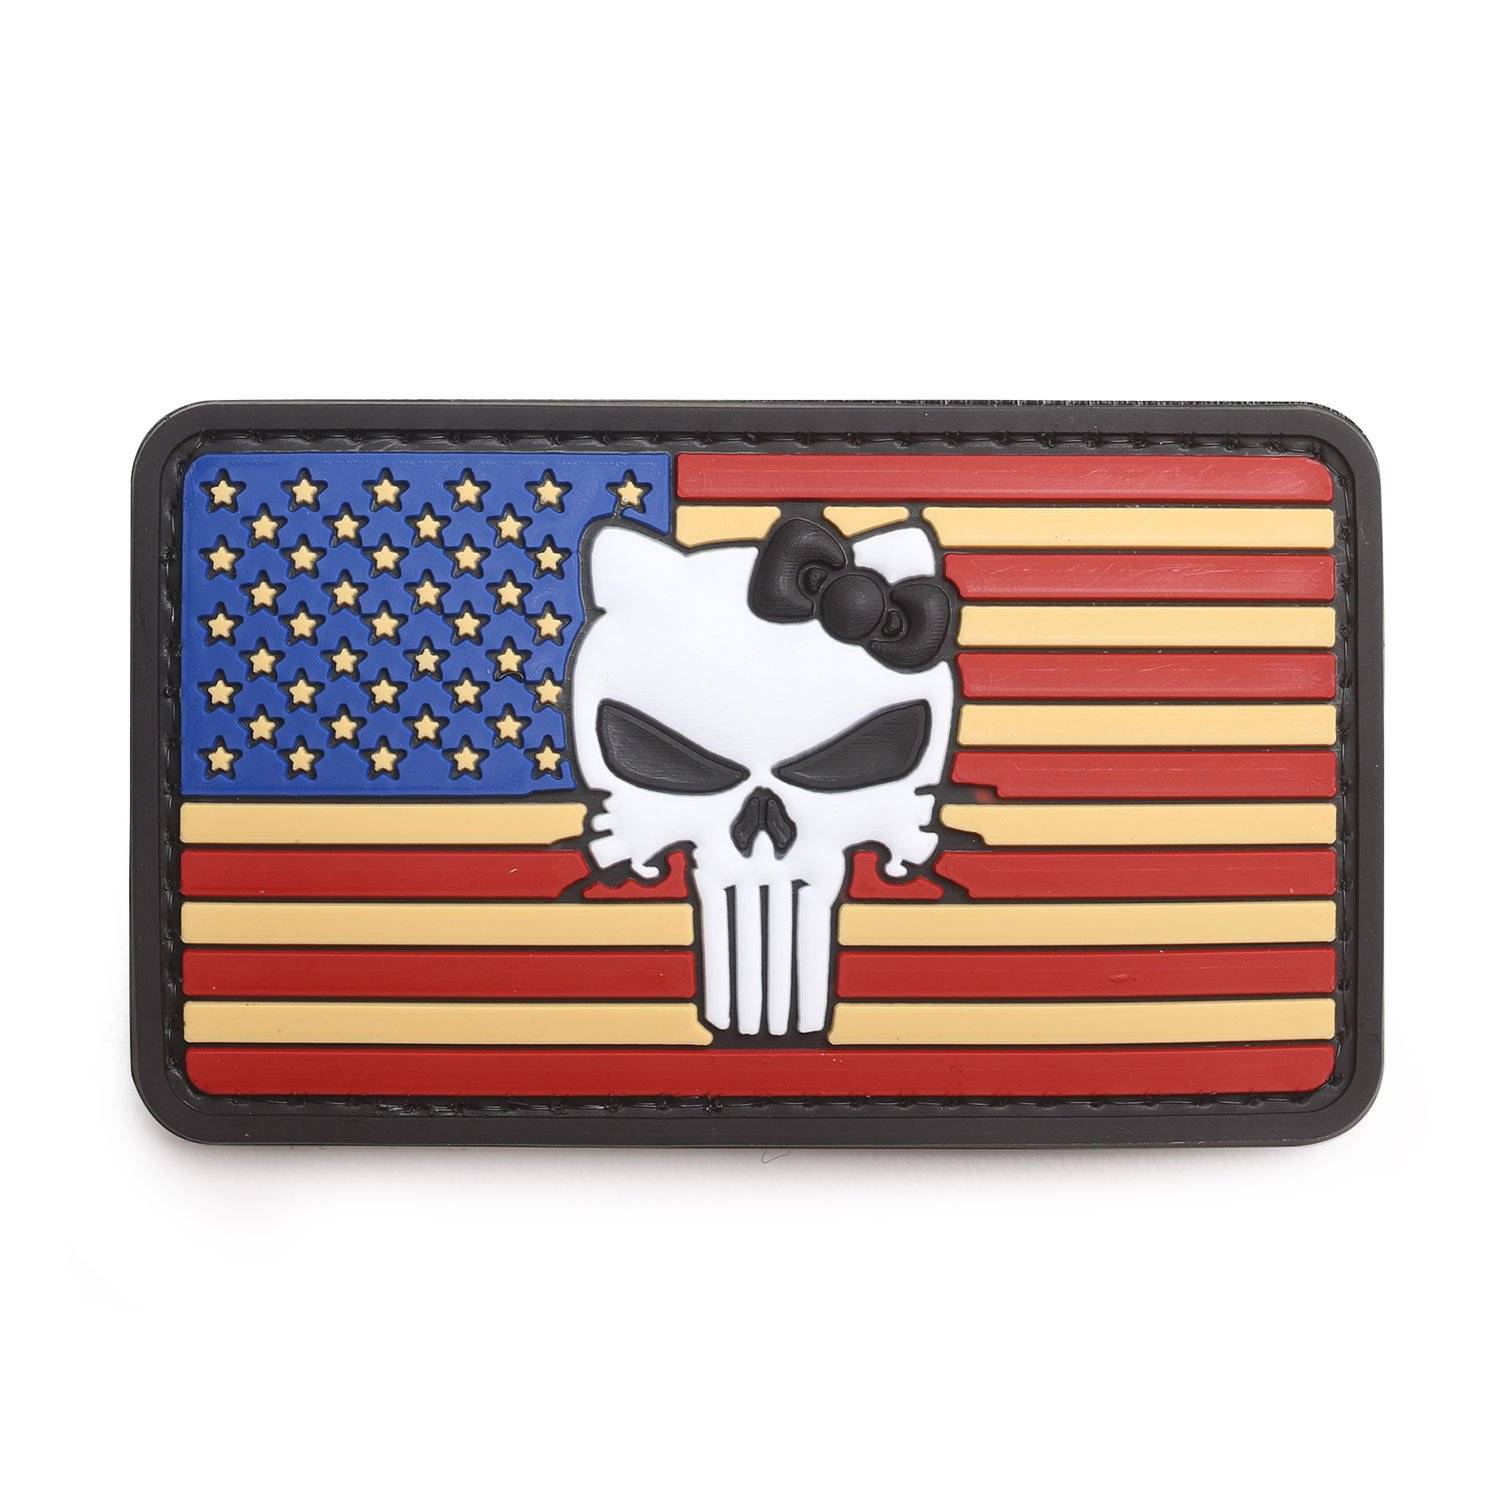 5ive Star Gear “Vintage Flag with Kitty” Morale Patch